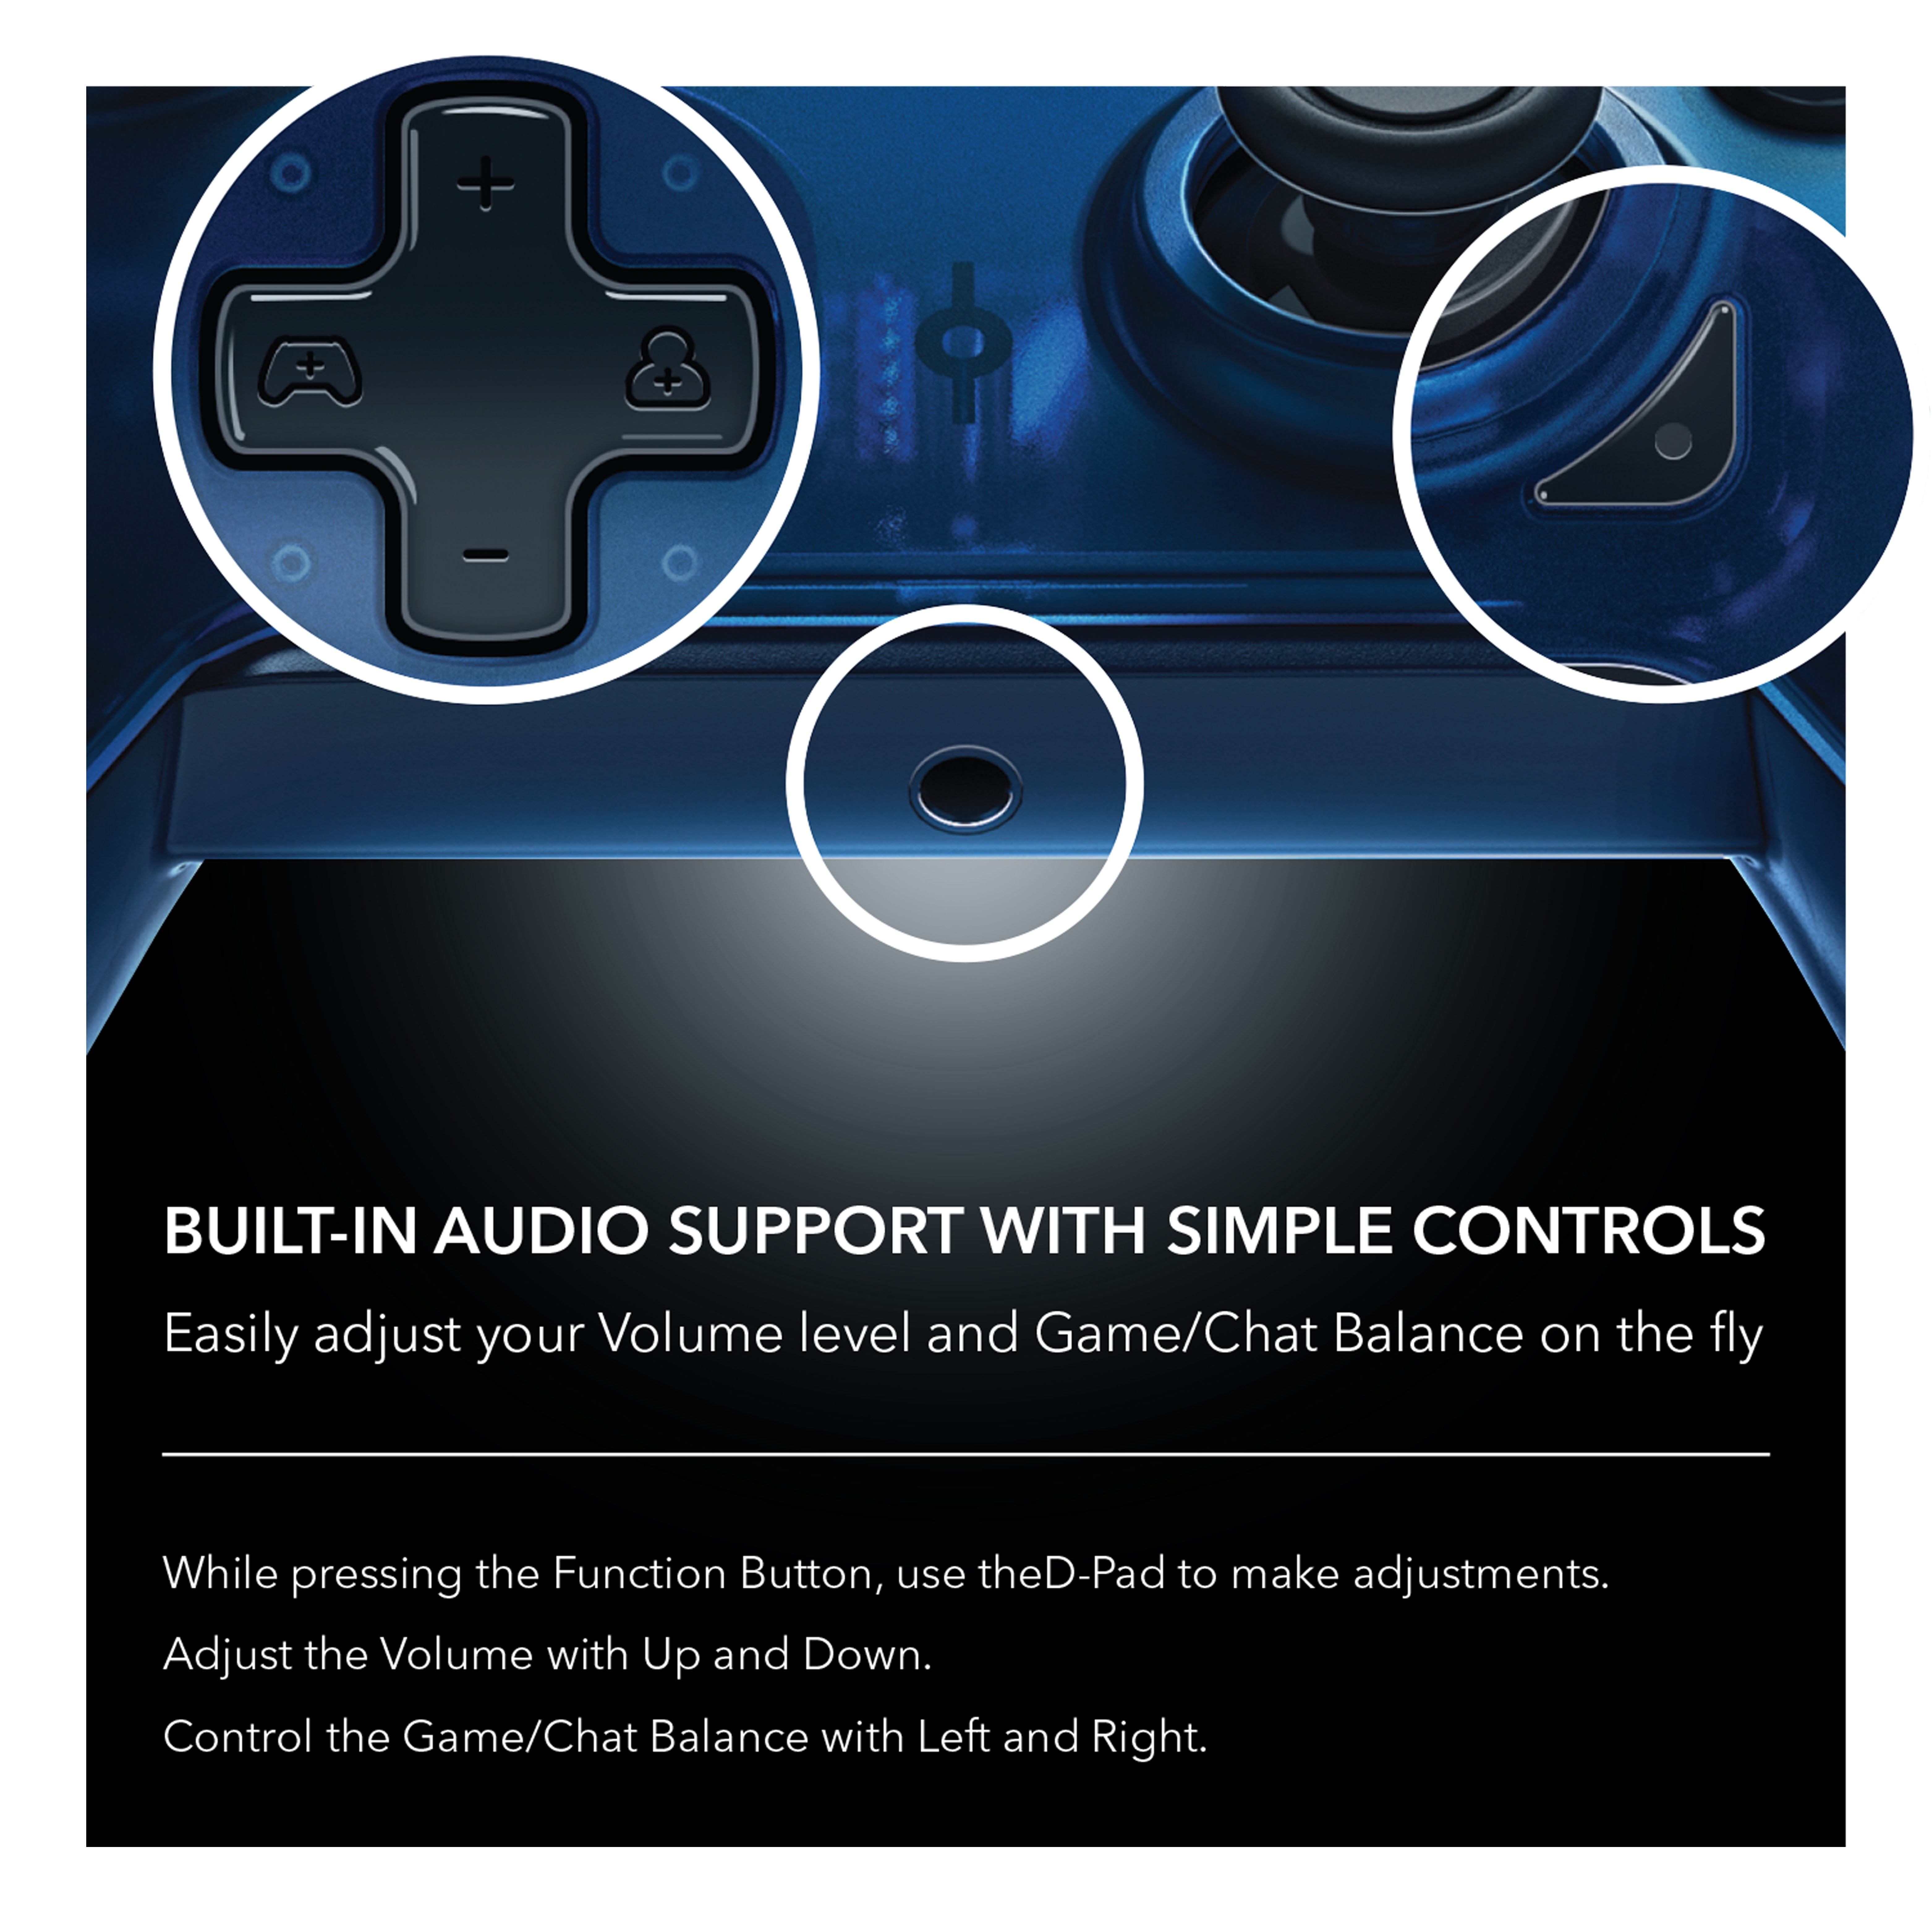 xbox one stealth series wired controller